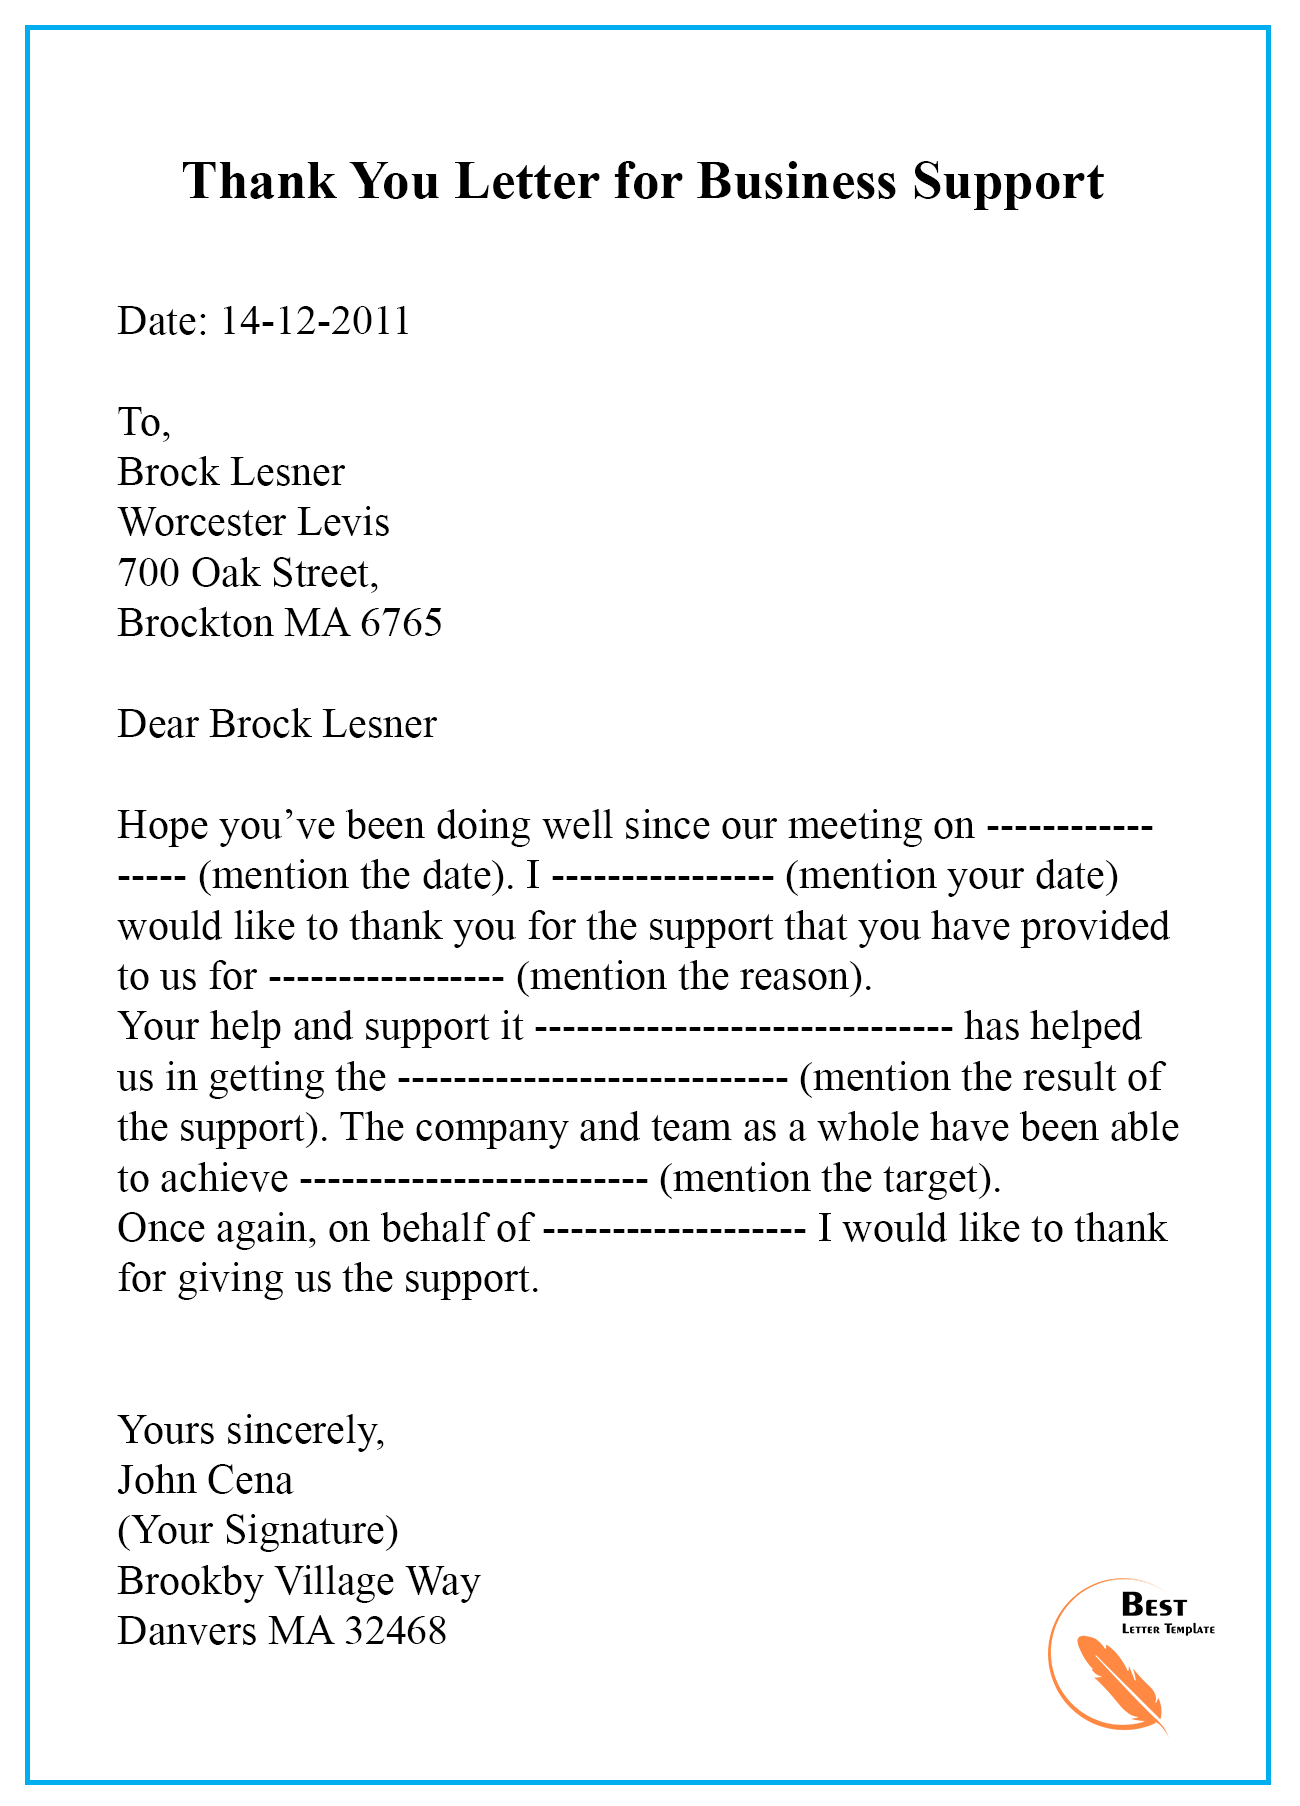 Thank You Letter After Business Meeting - Sample & Examples